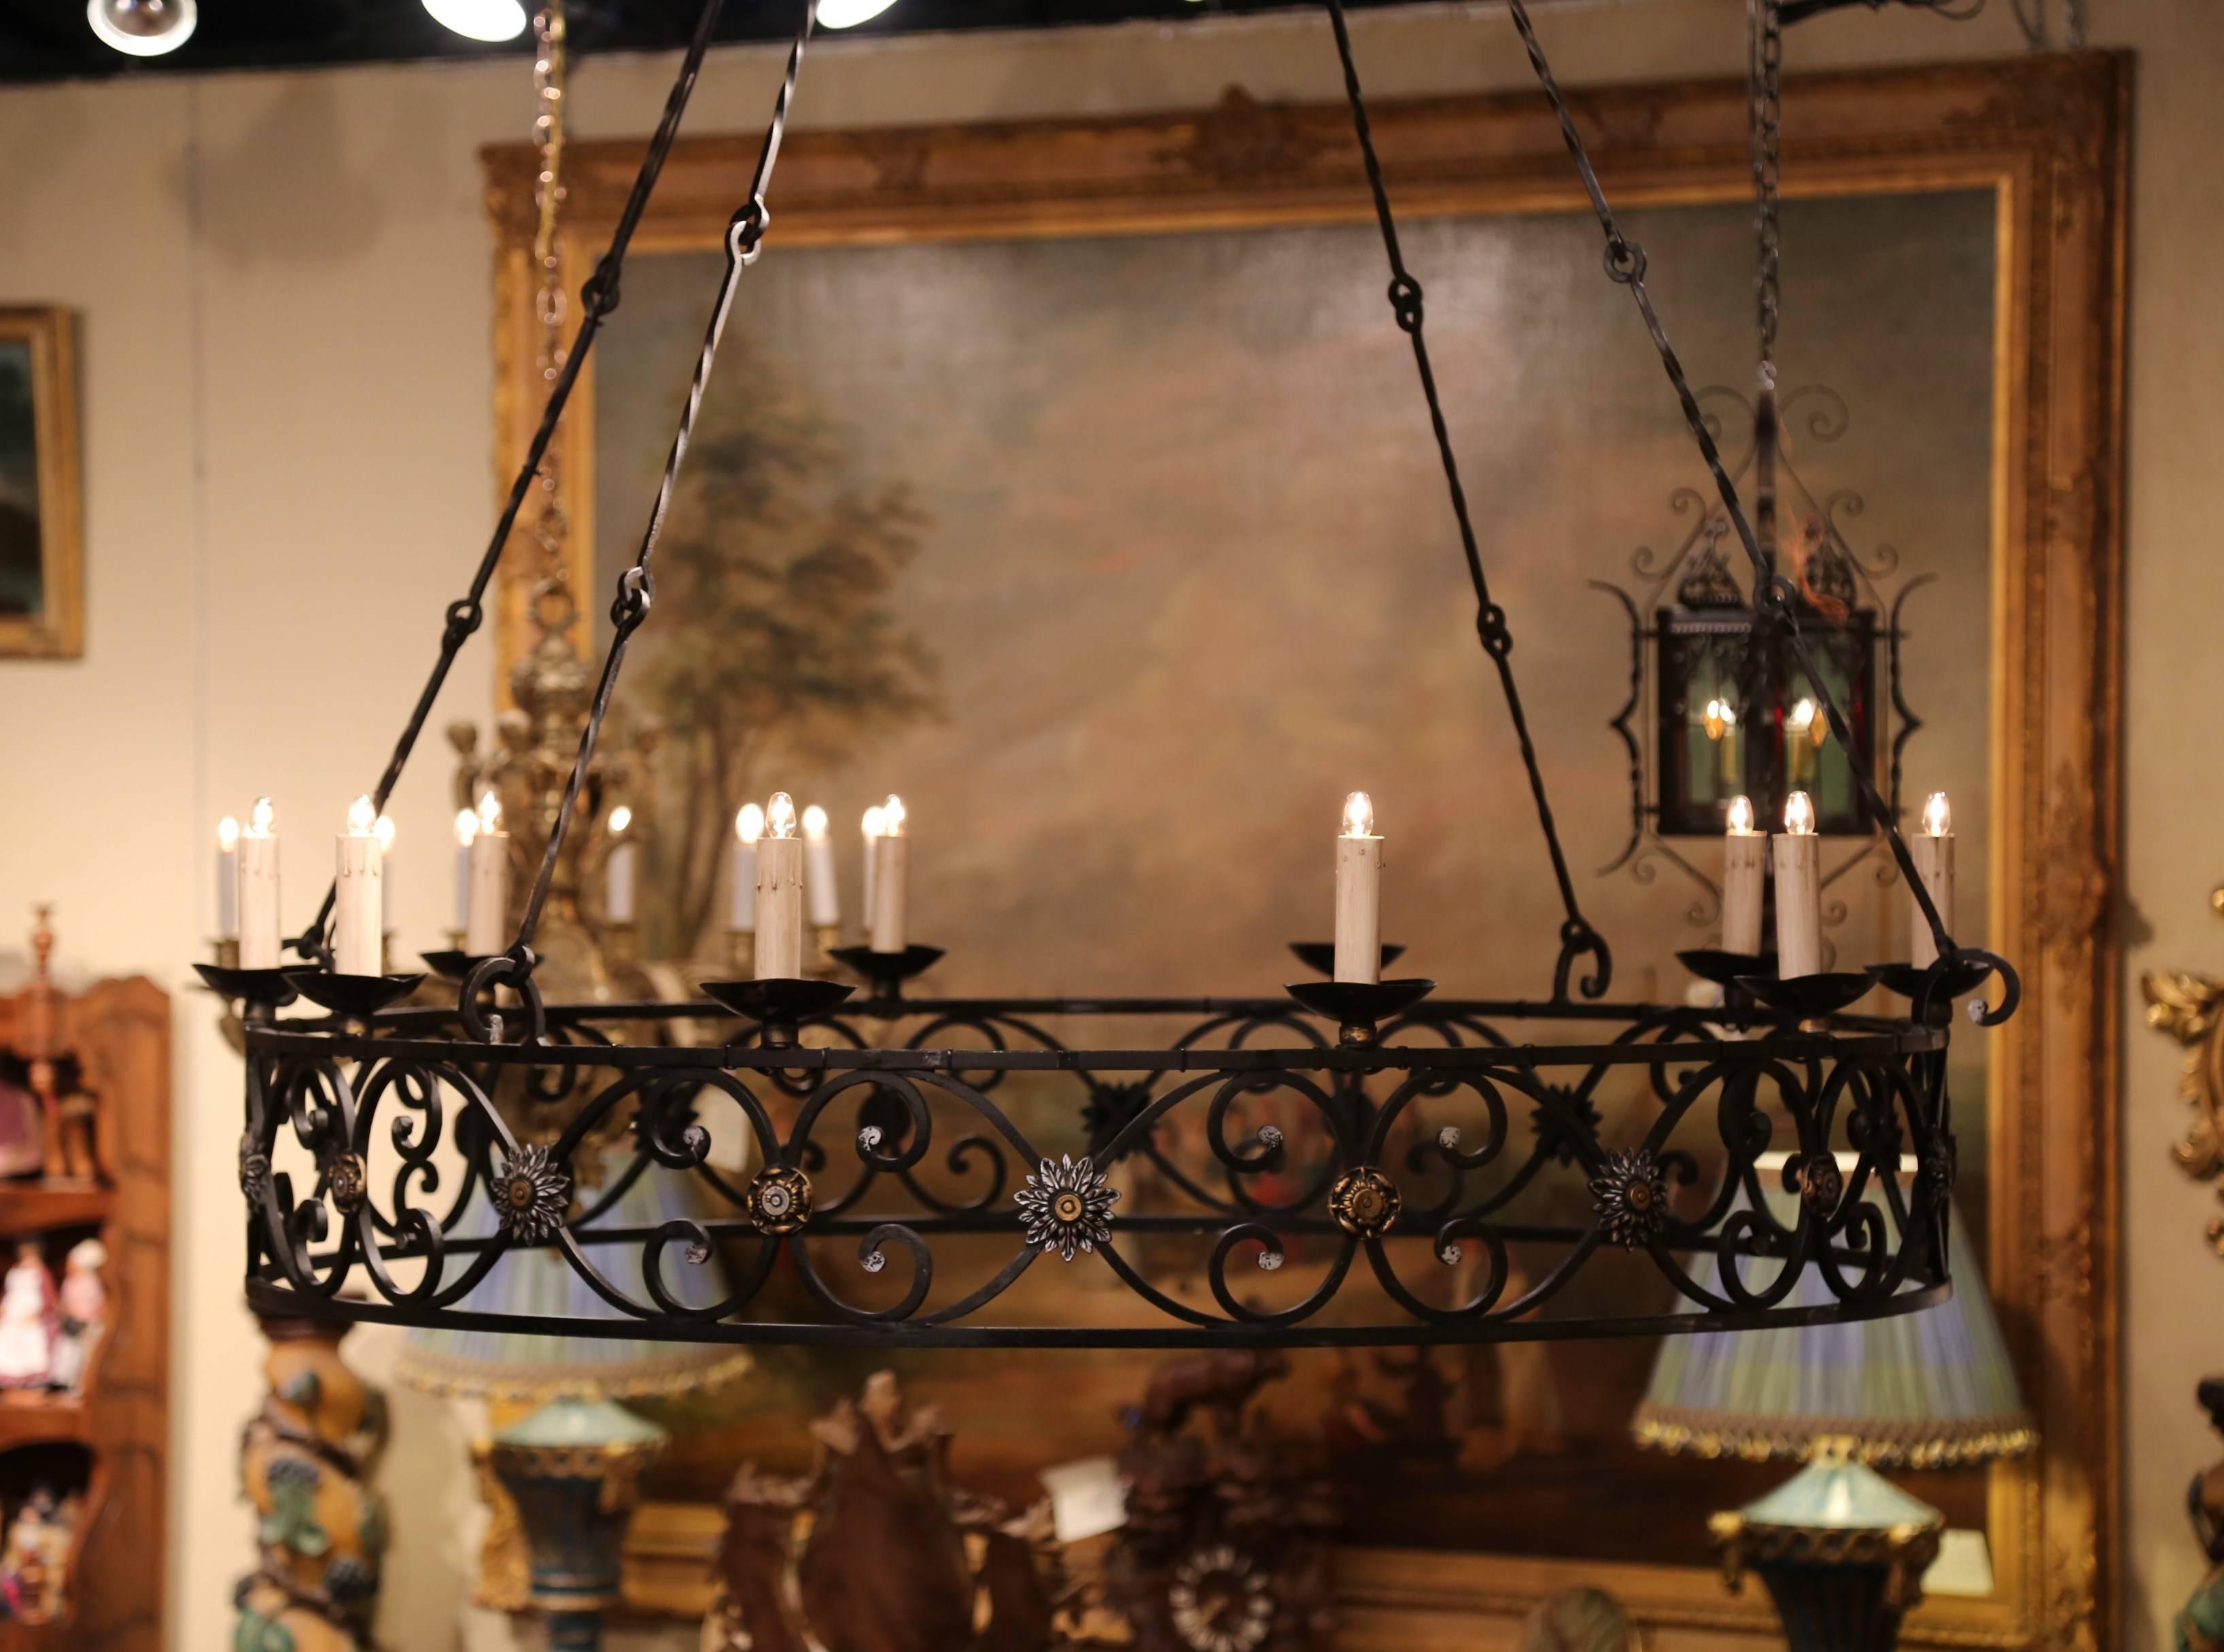 This monumental antique light fixture was created in Normandy, France; crafted circa 1920, the Gothic style chandelier features ten lights newly wired over a large iron gallery with scrolls and flowers medallions. It has the original four chains